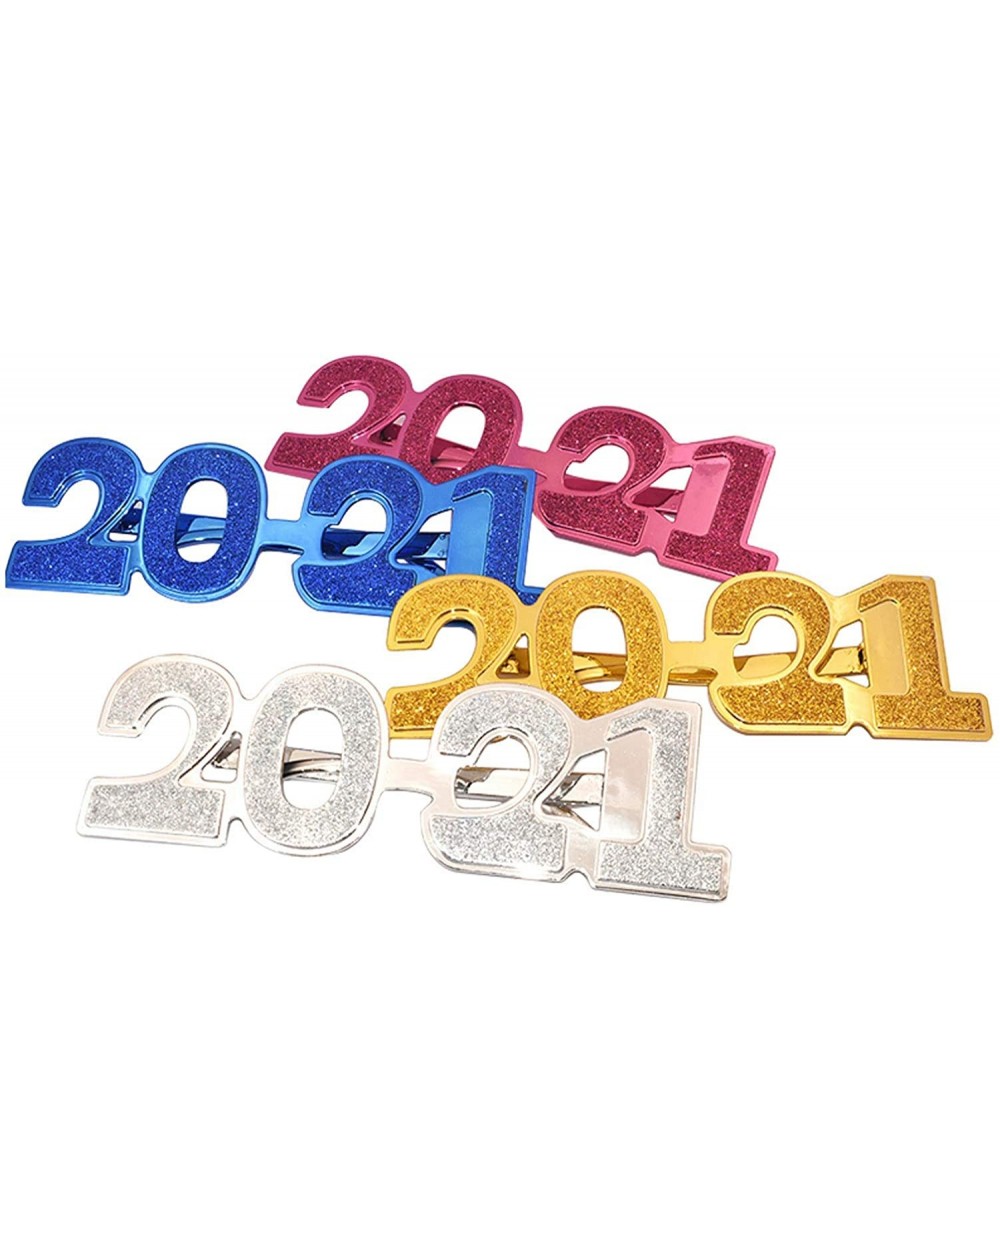 Photobooth Props 4PCS 2021 Plastic Glasses Happy New Year's Eve Glasses Graduation 2021 Class Of 2021 Party Photo Prop Suppli...